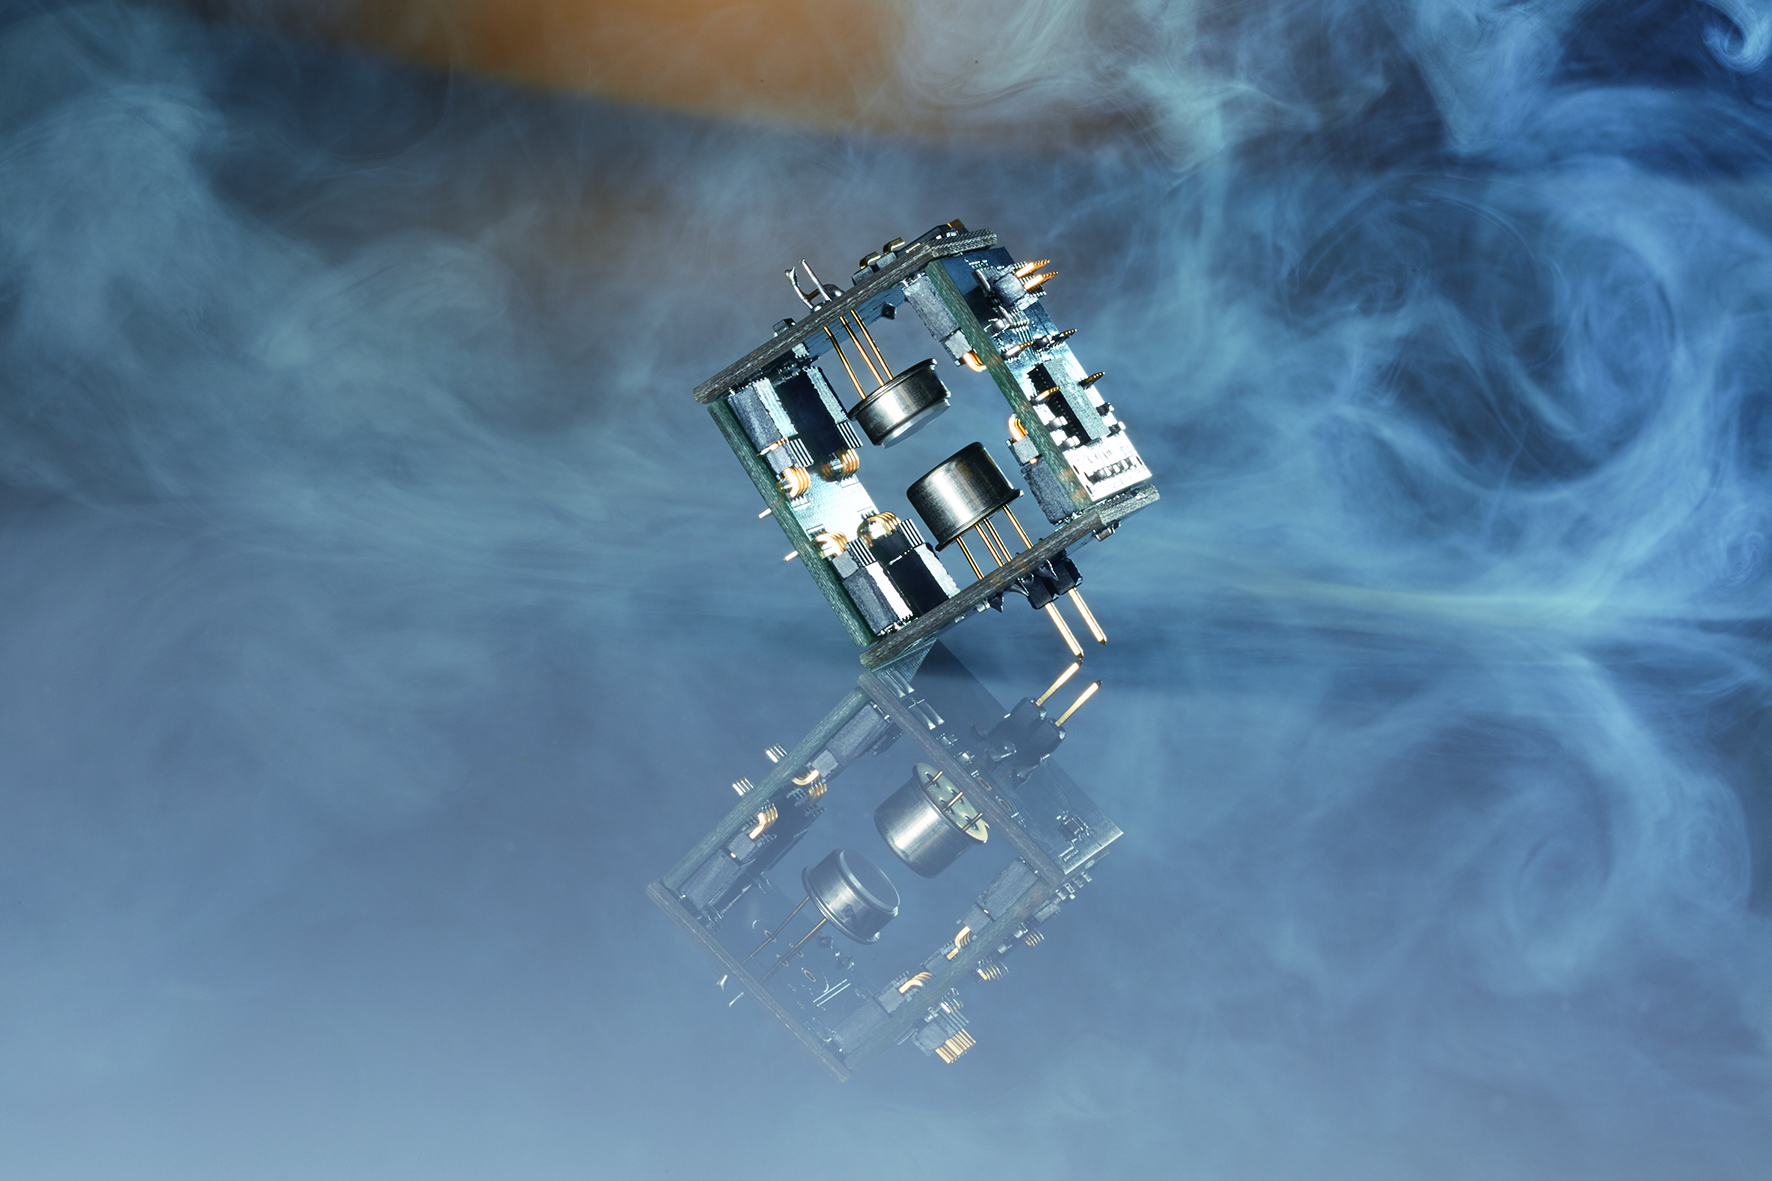 Miniaturized photoacoustics 2-chamber sensor system for CO2 measurement (dimensions: 25 mm × 25 mm × 25 mm).